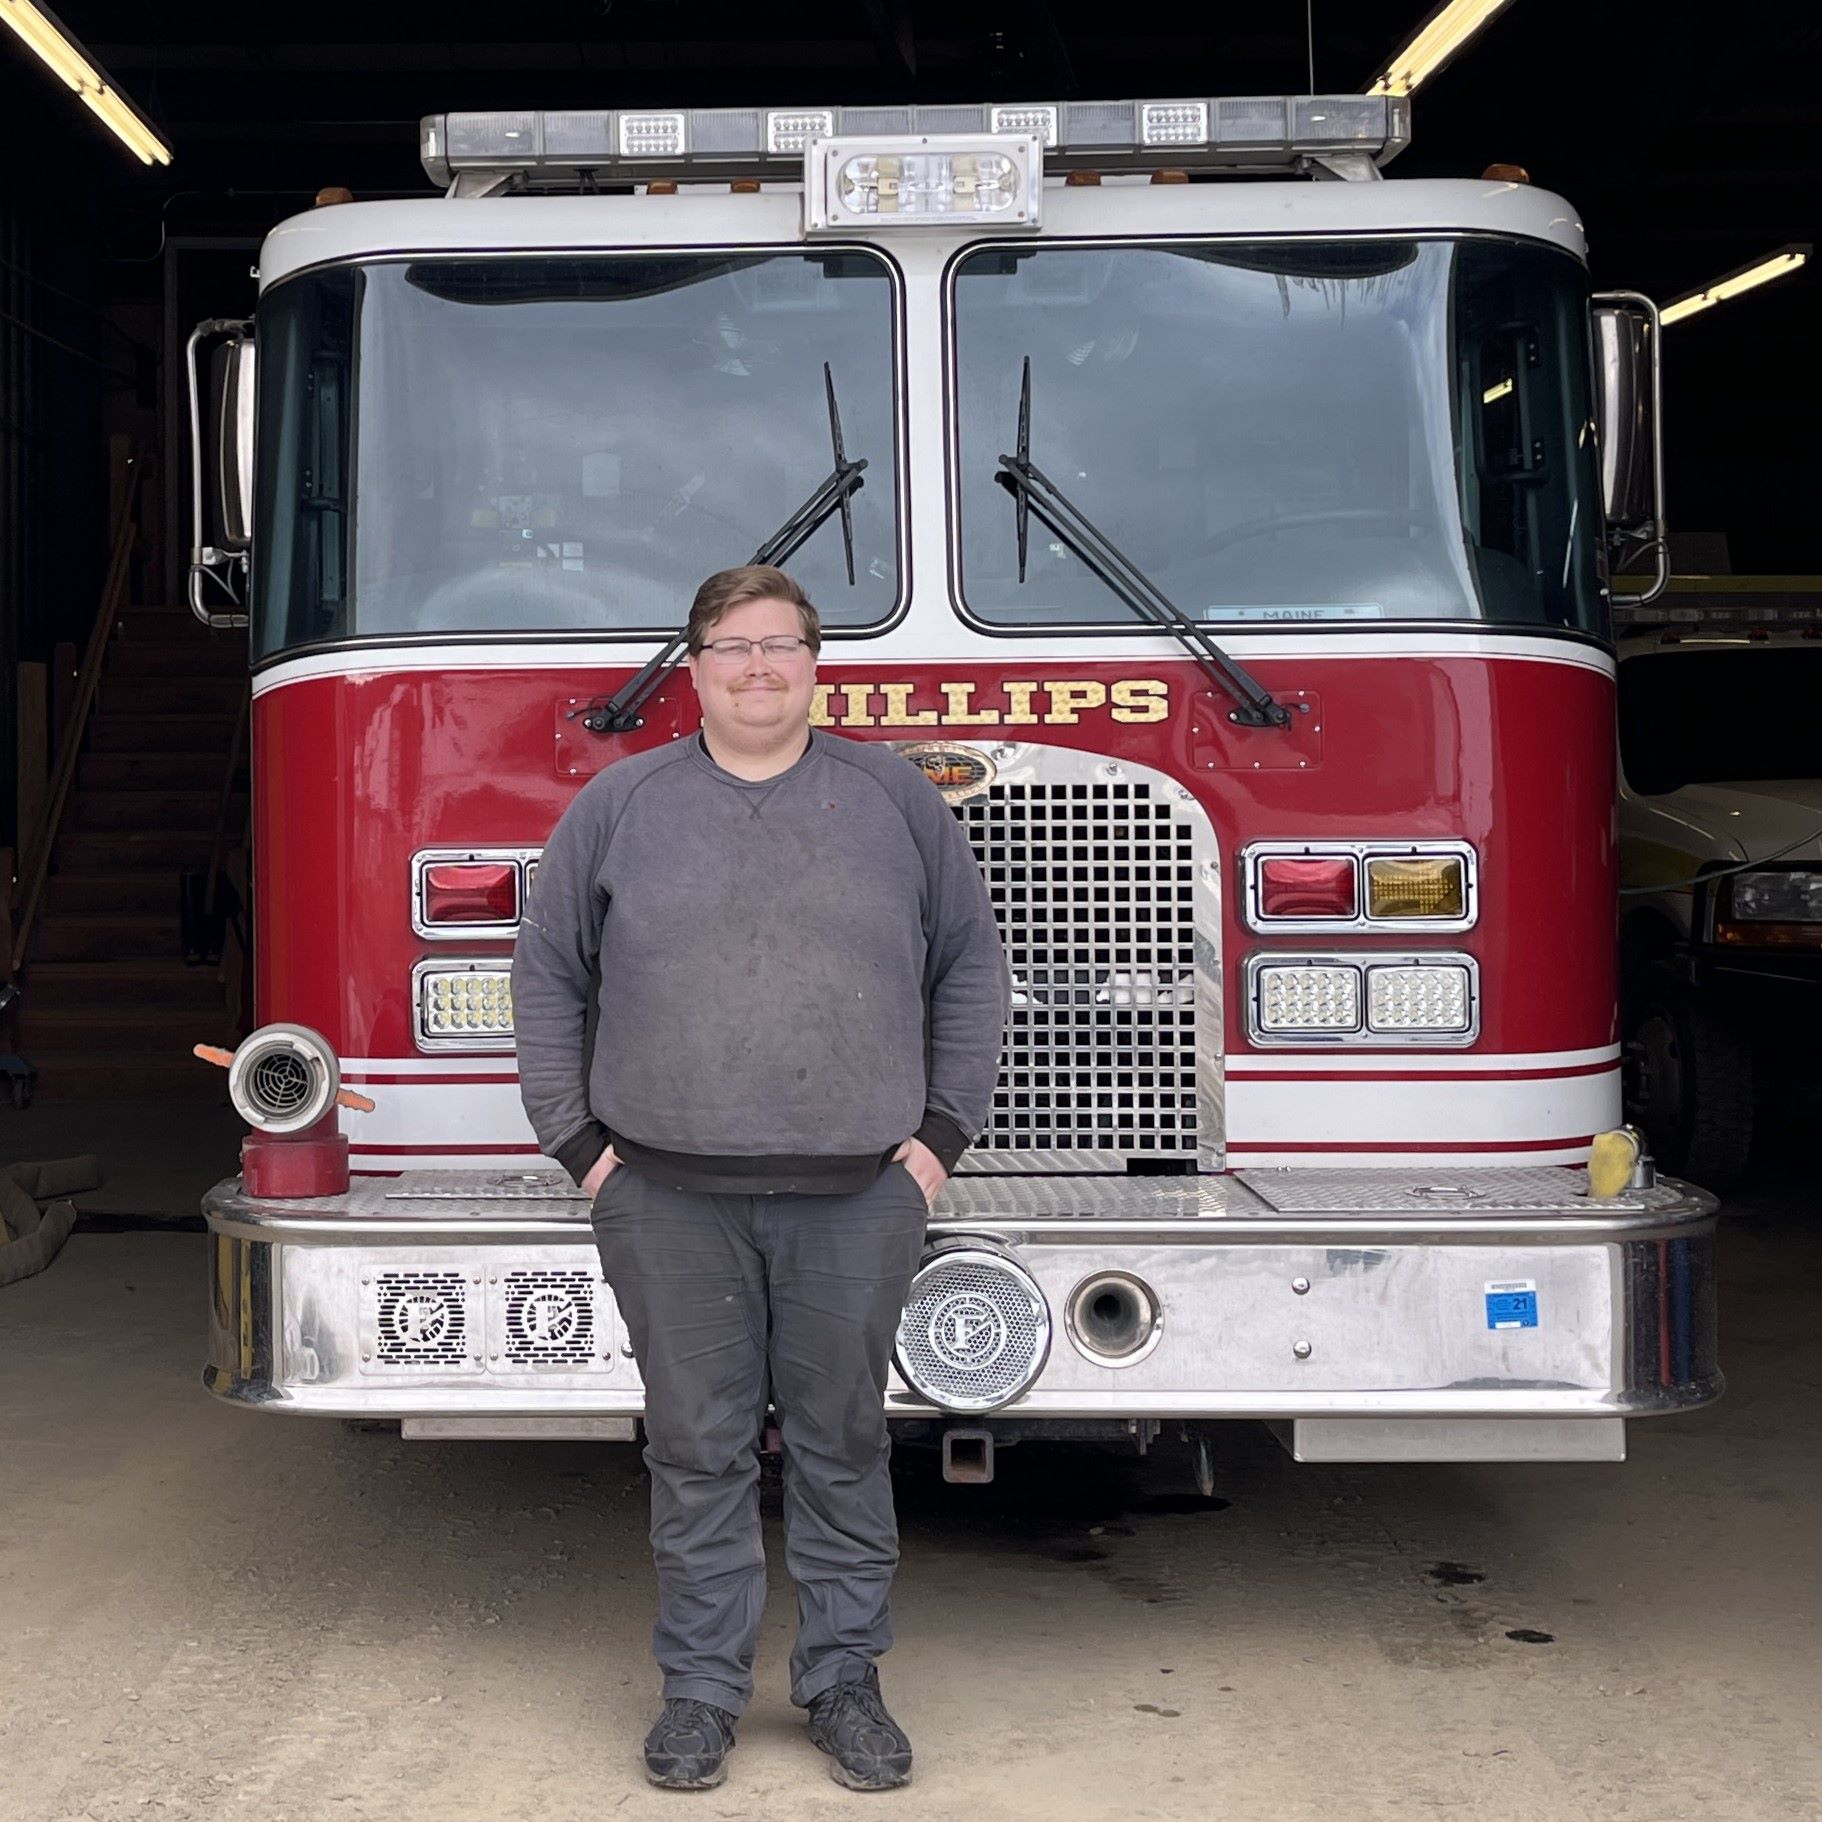 Captain Sean Allen poses for a photo in front of a fire truck.